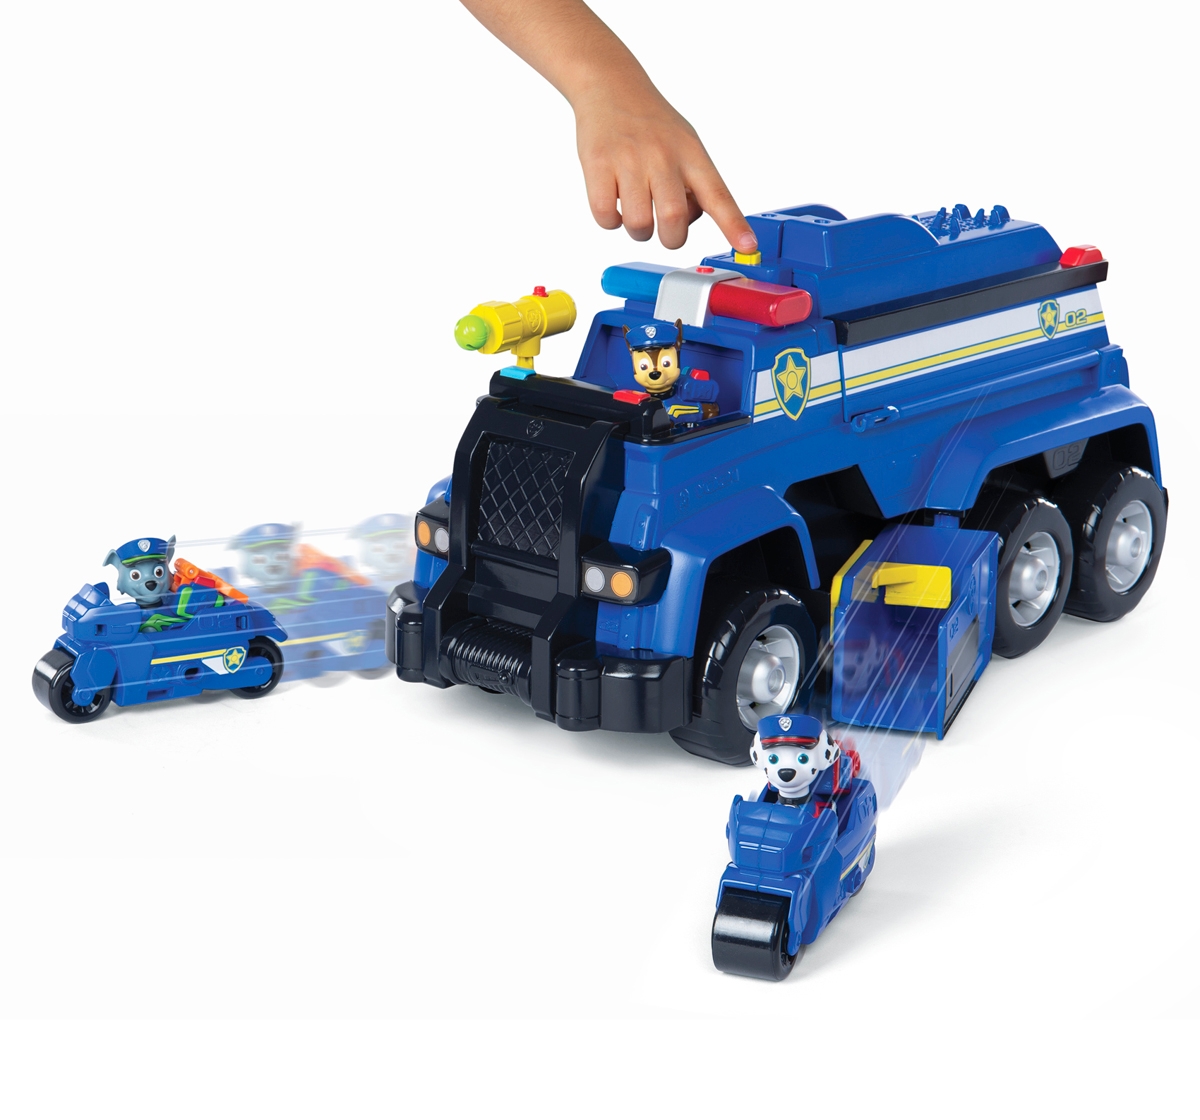 Paw Patrol | Paw Patrol Chase Dluxe Cruser Roleplay Set for Kids 3Y+, Blue 7